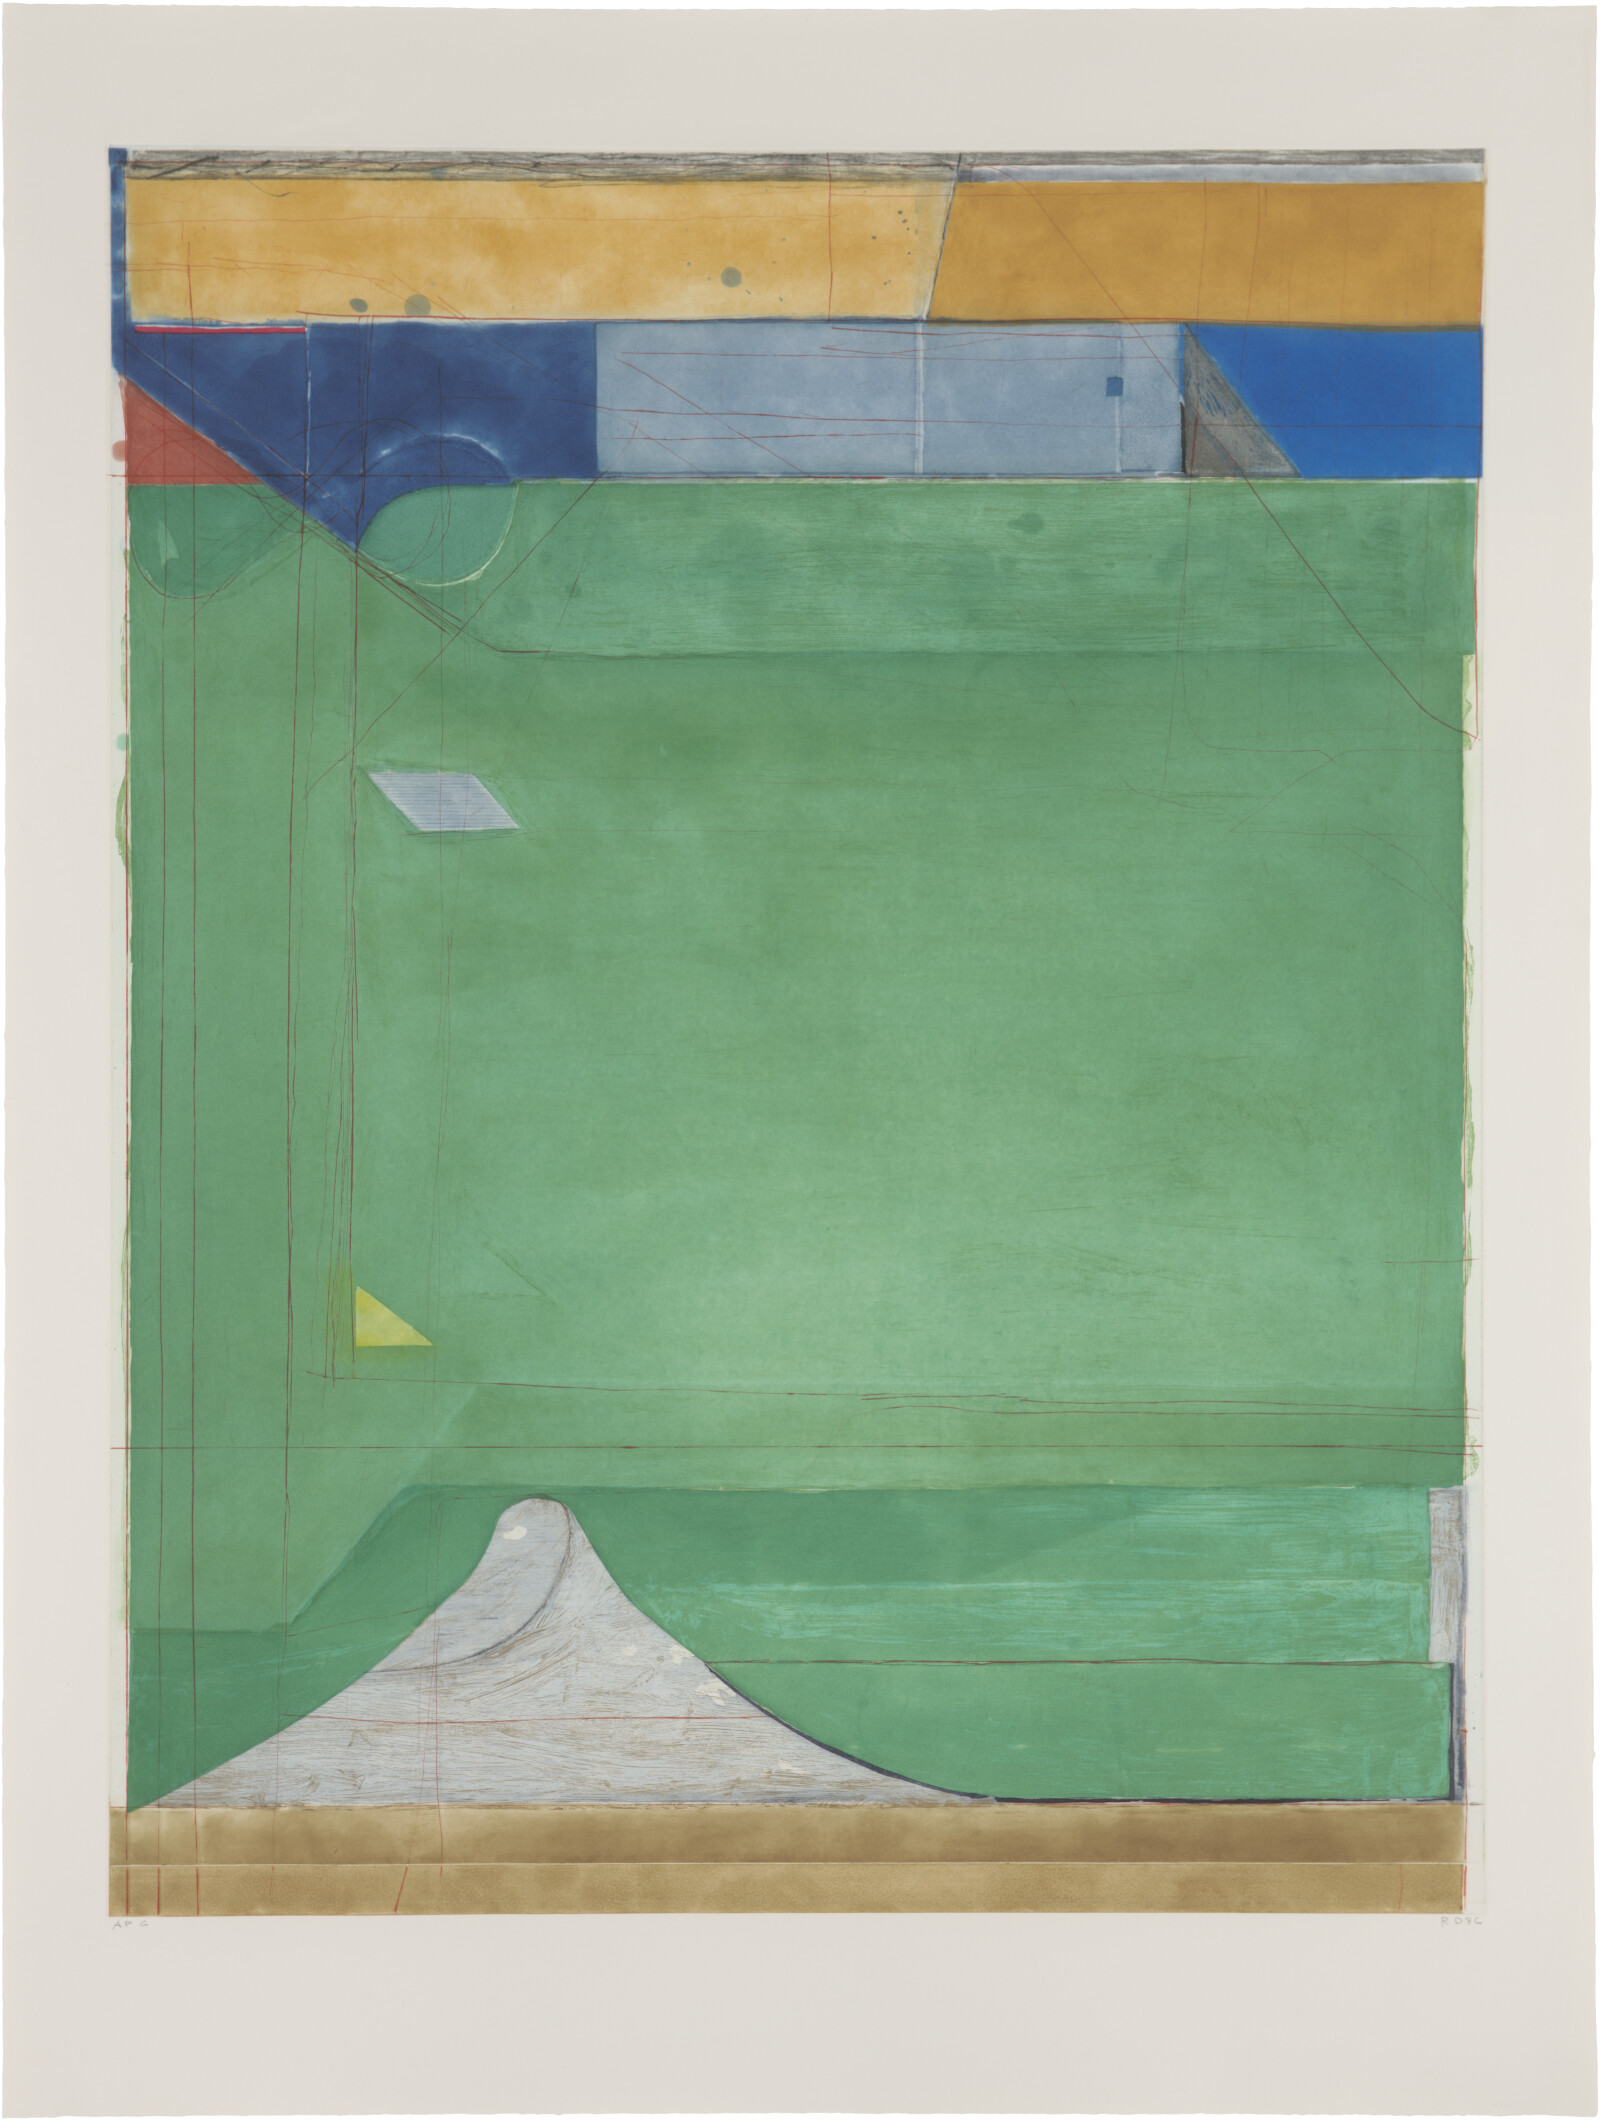 Green by Richard Diebenkorn: The Story of a Print